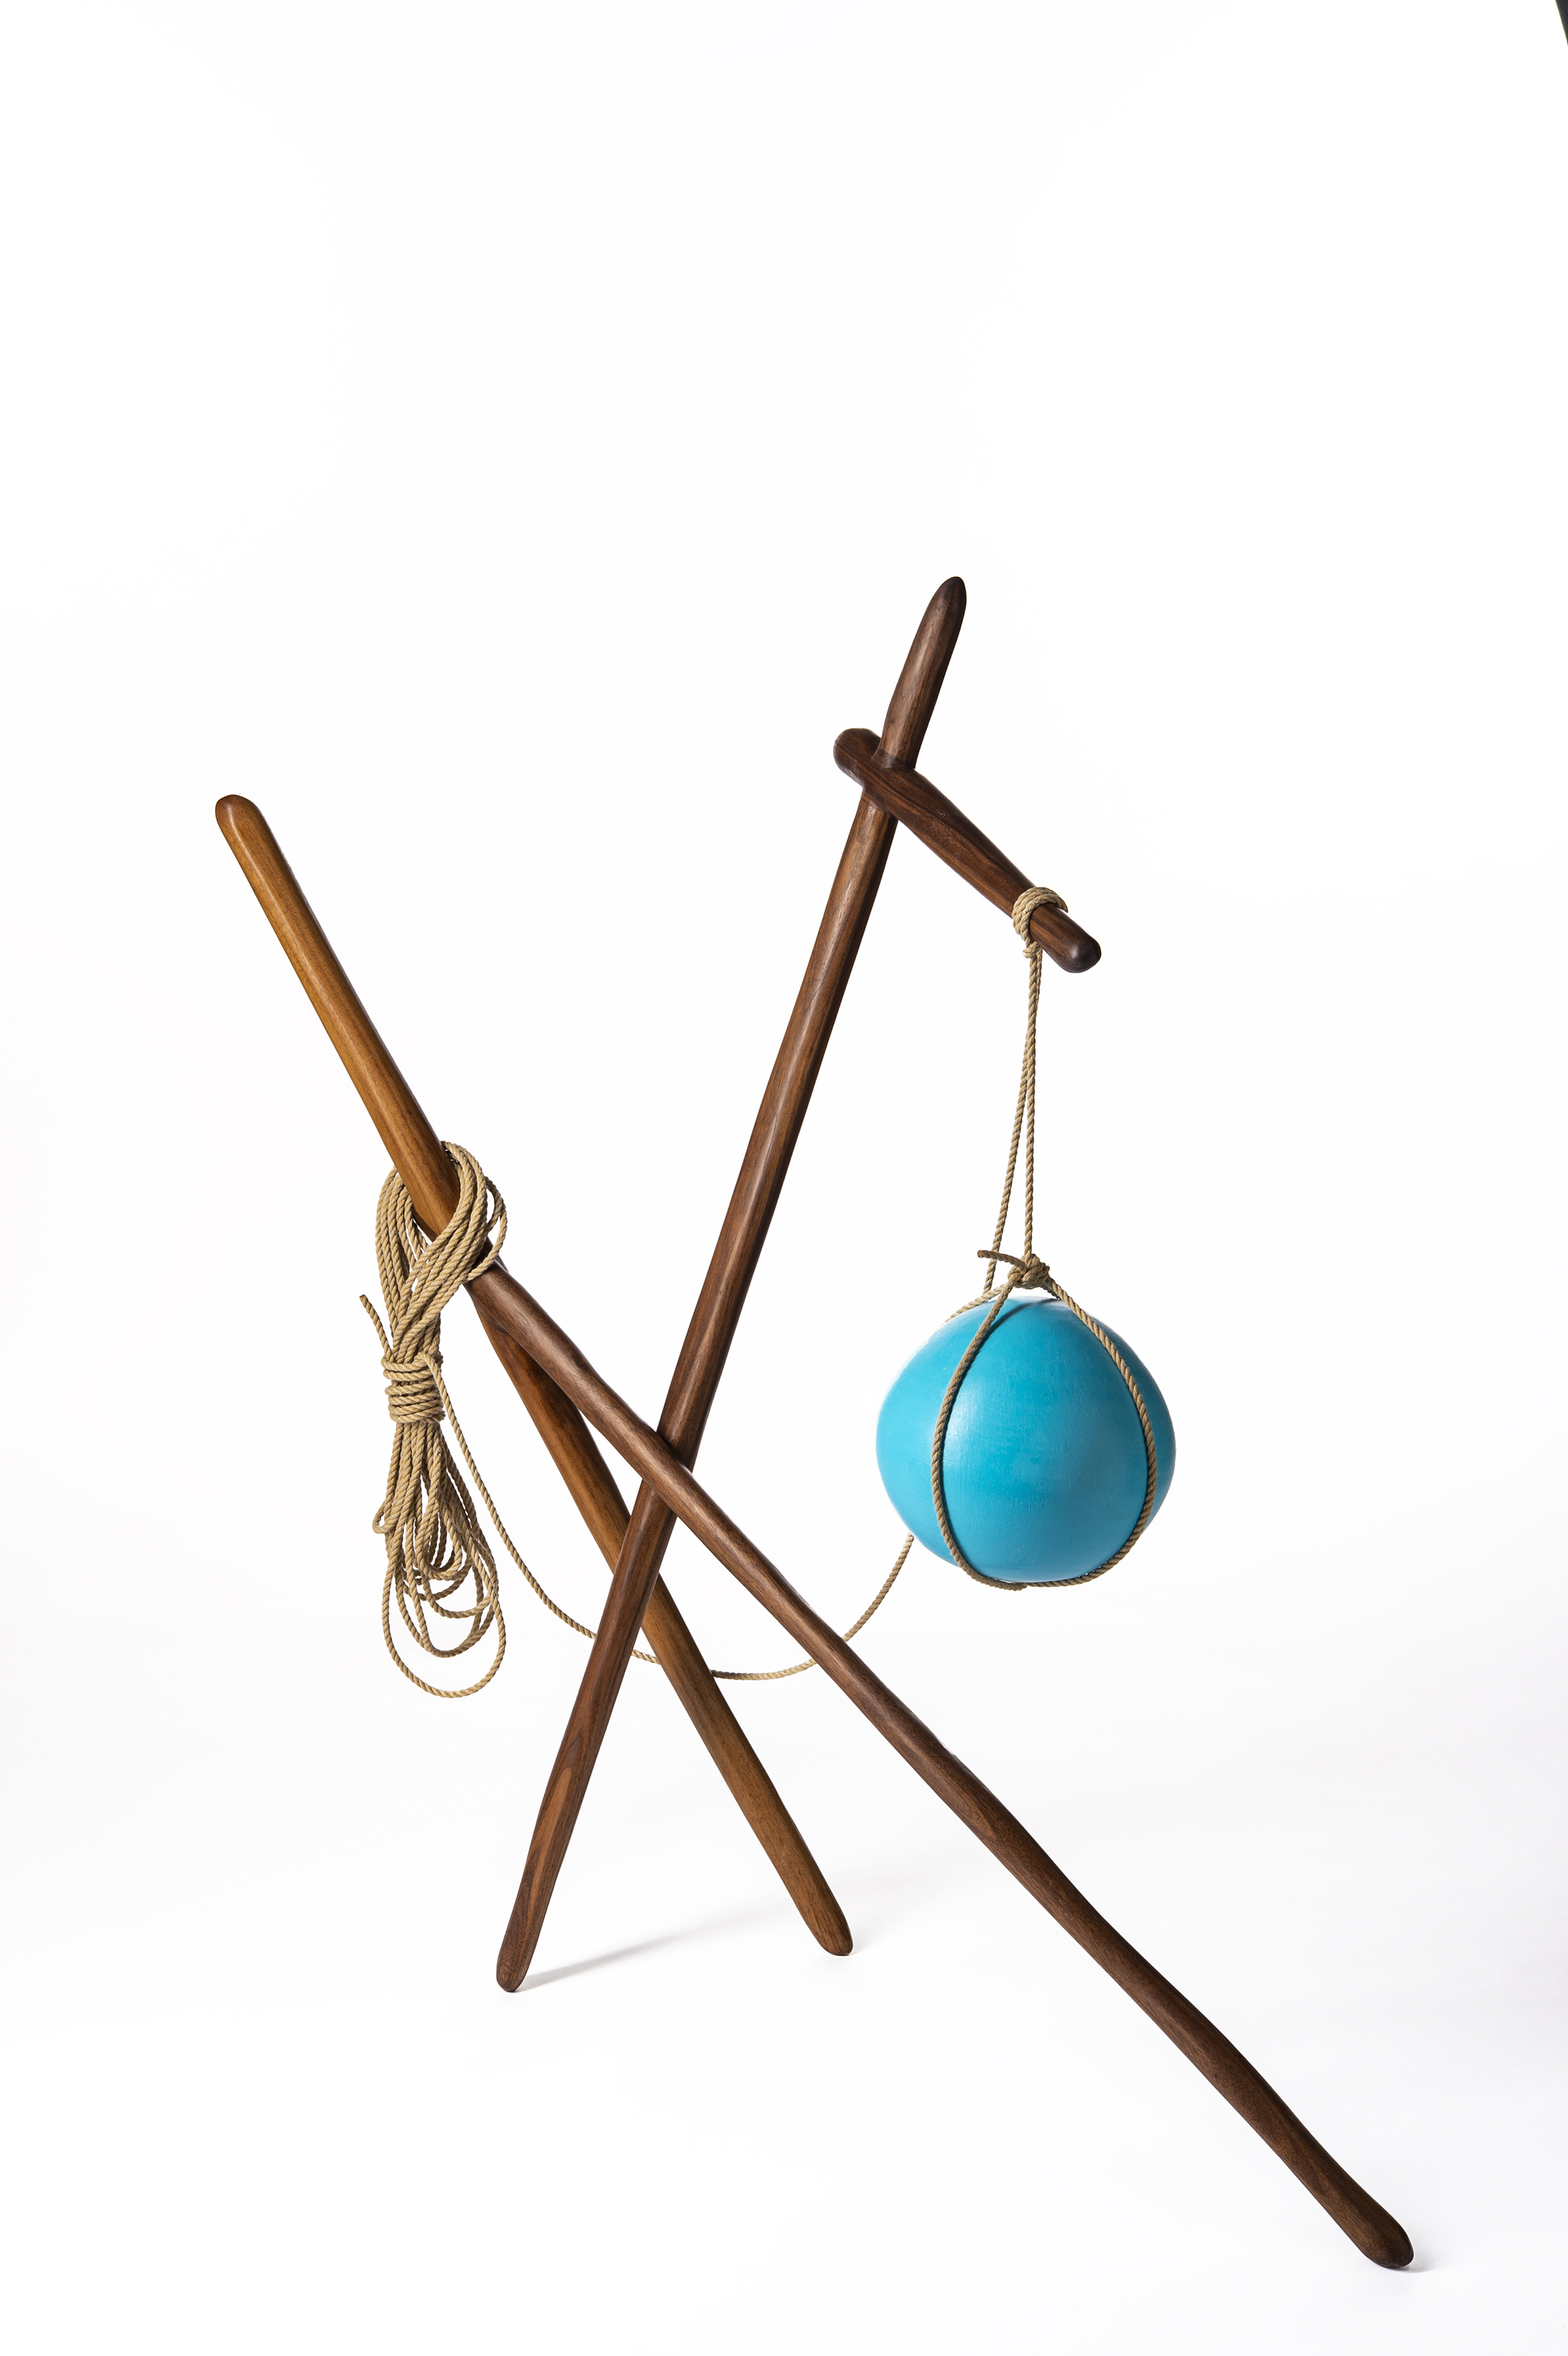 A wood sculpture with a rope holding a blue ball.